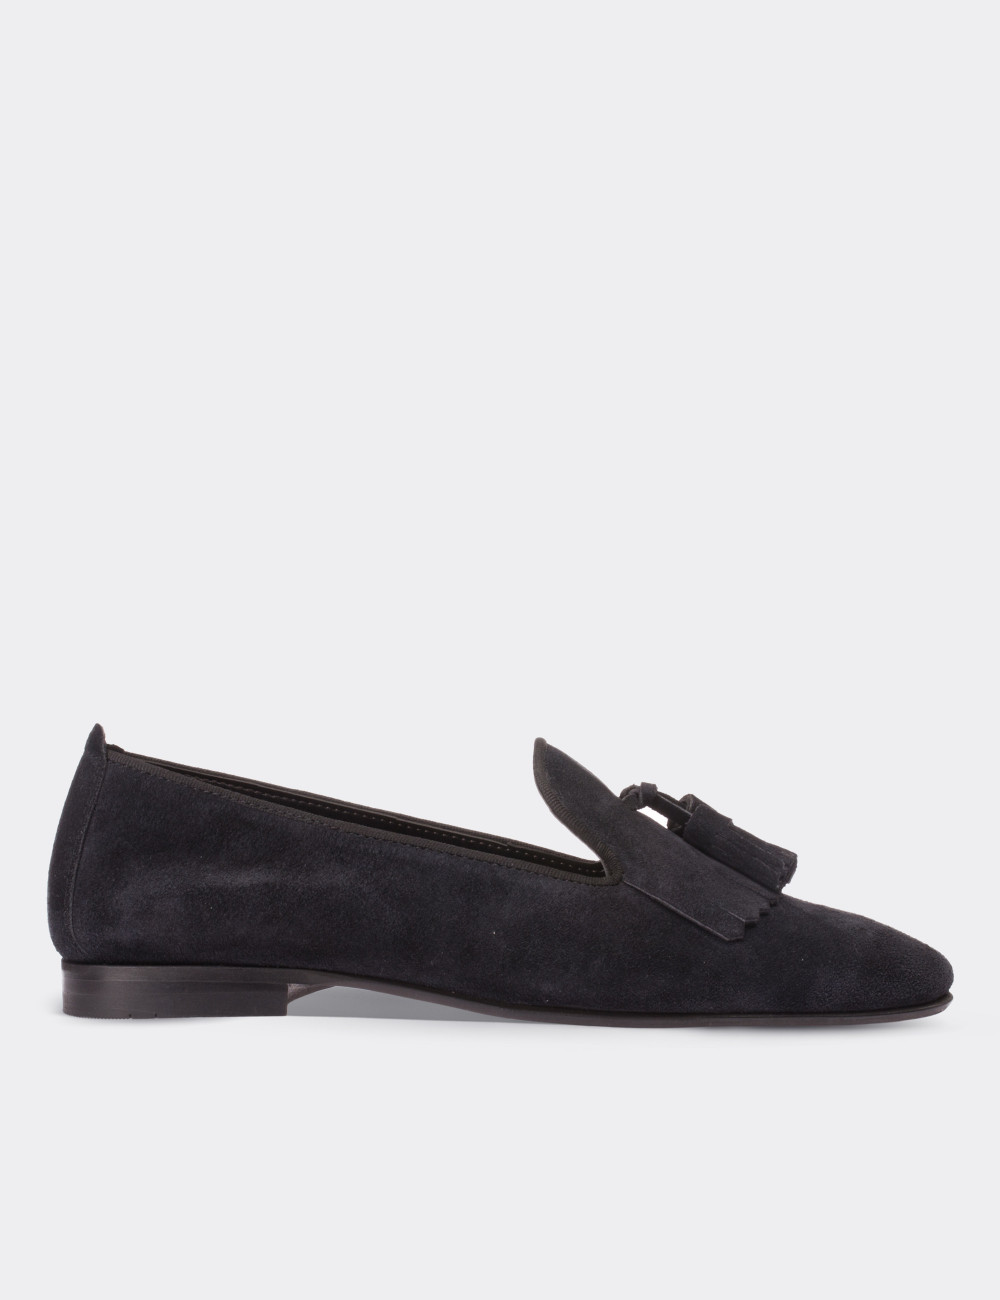 Navy Suede Leather Loafers - 01612ZLCVM04